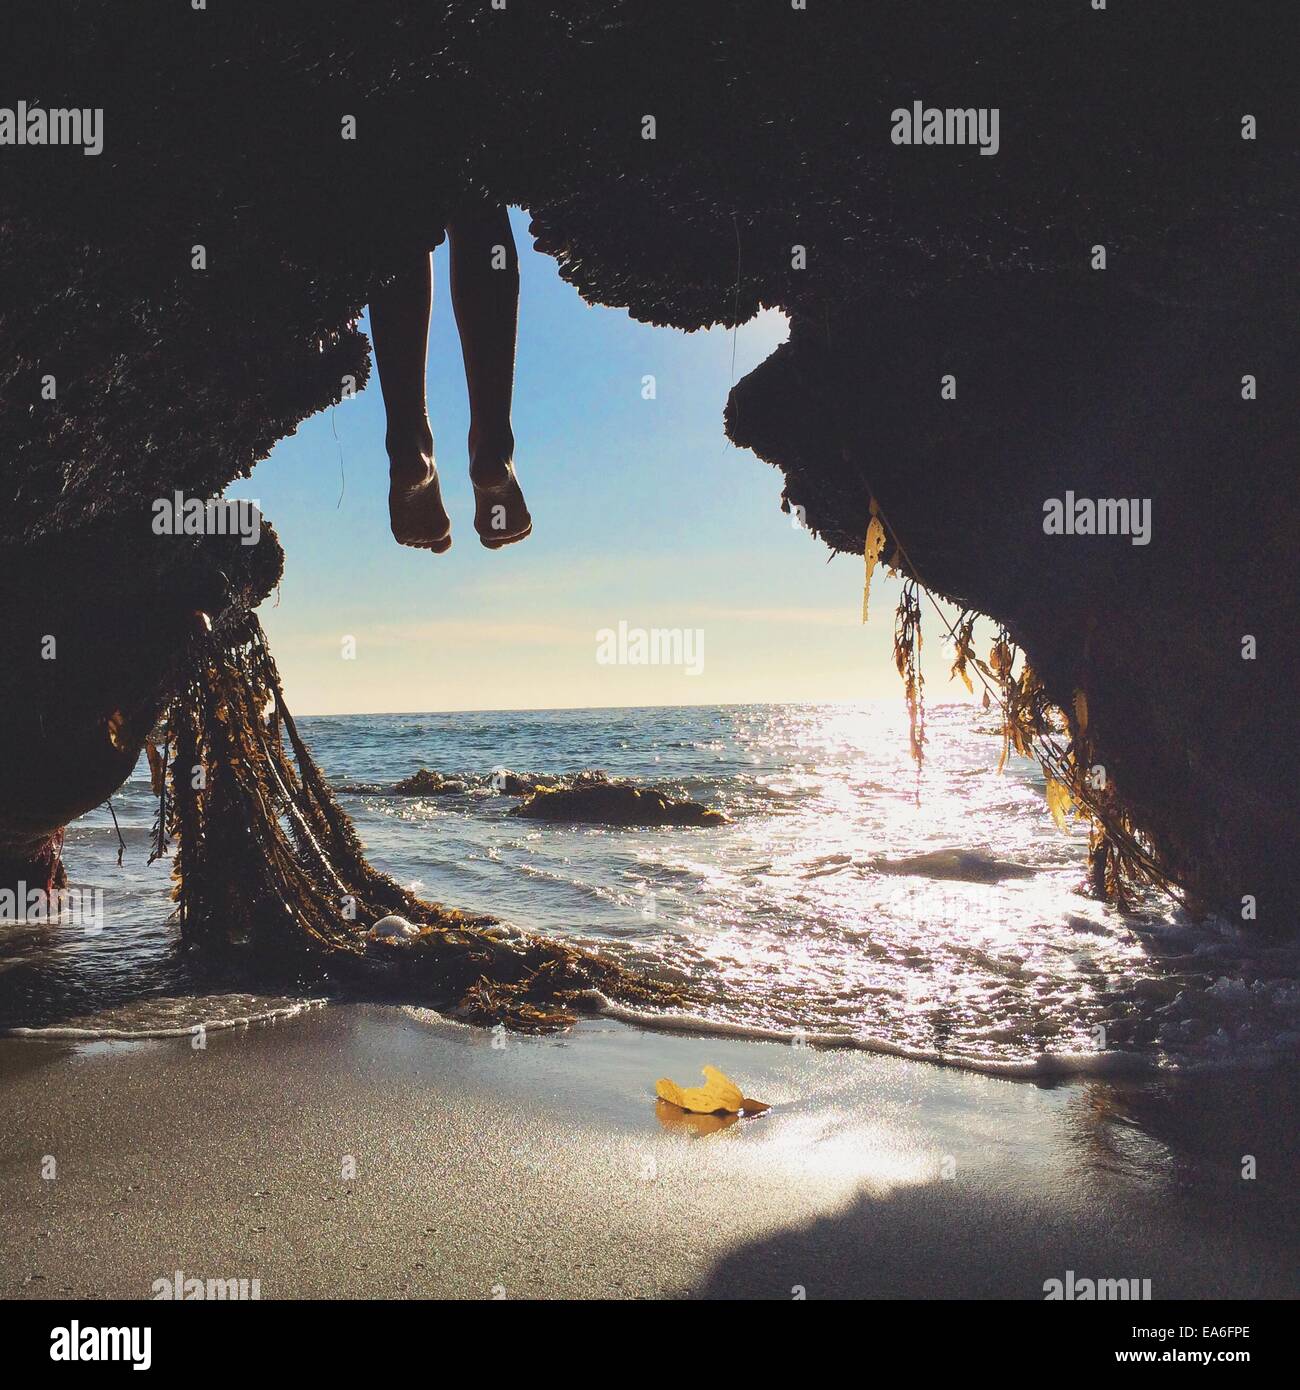 Person's legs hanging in front of cave entrance on beach Stock Photo